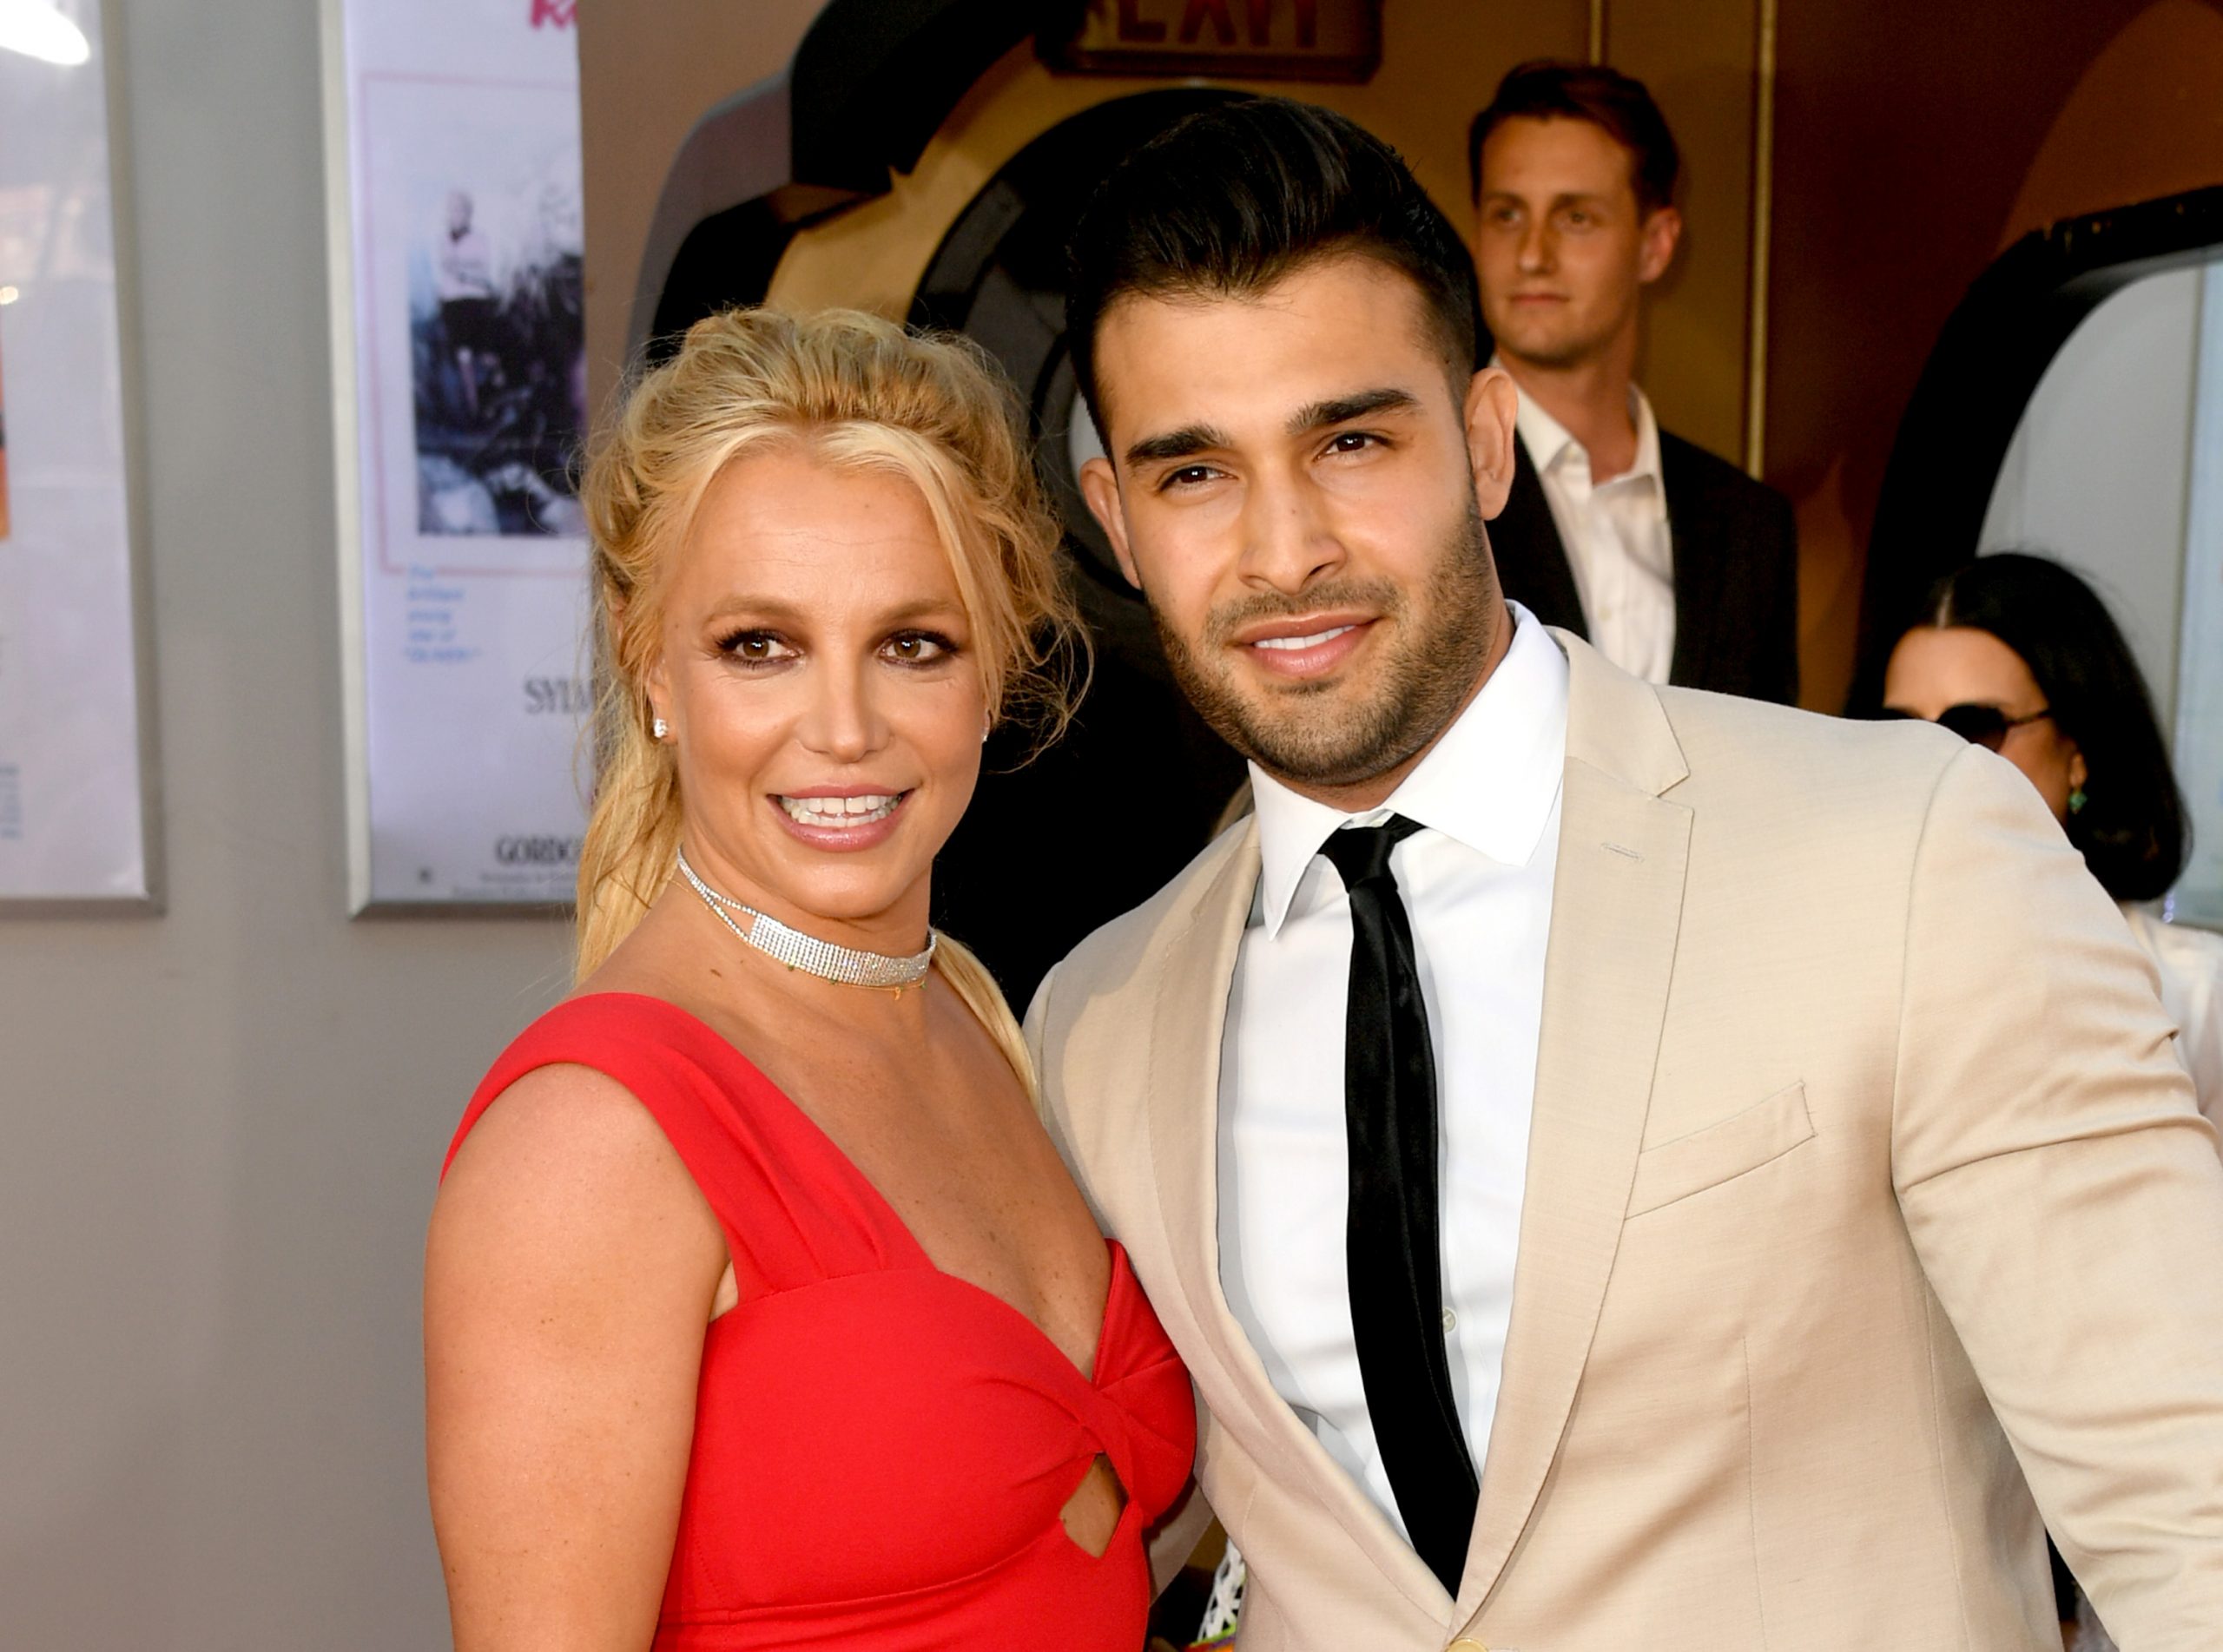 Britney Spears’ husband Sam Asghari ‘files for divorce’ just hours after split bombshell and ‘cheating claims’